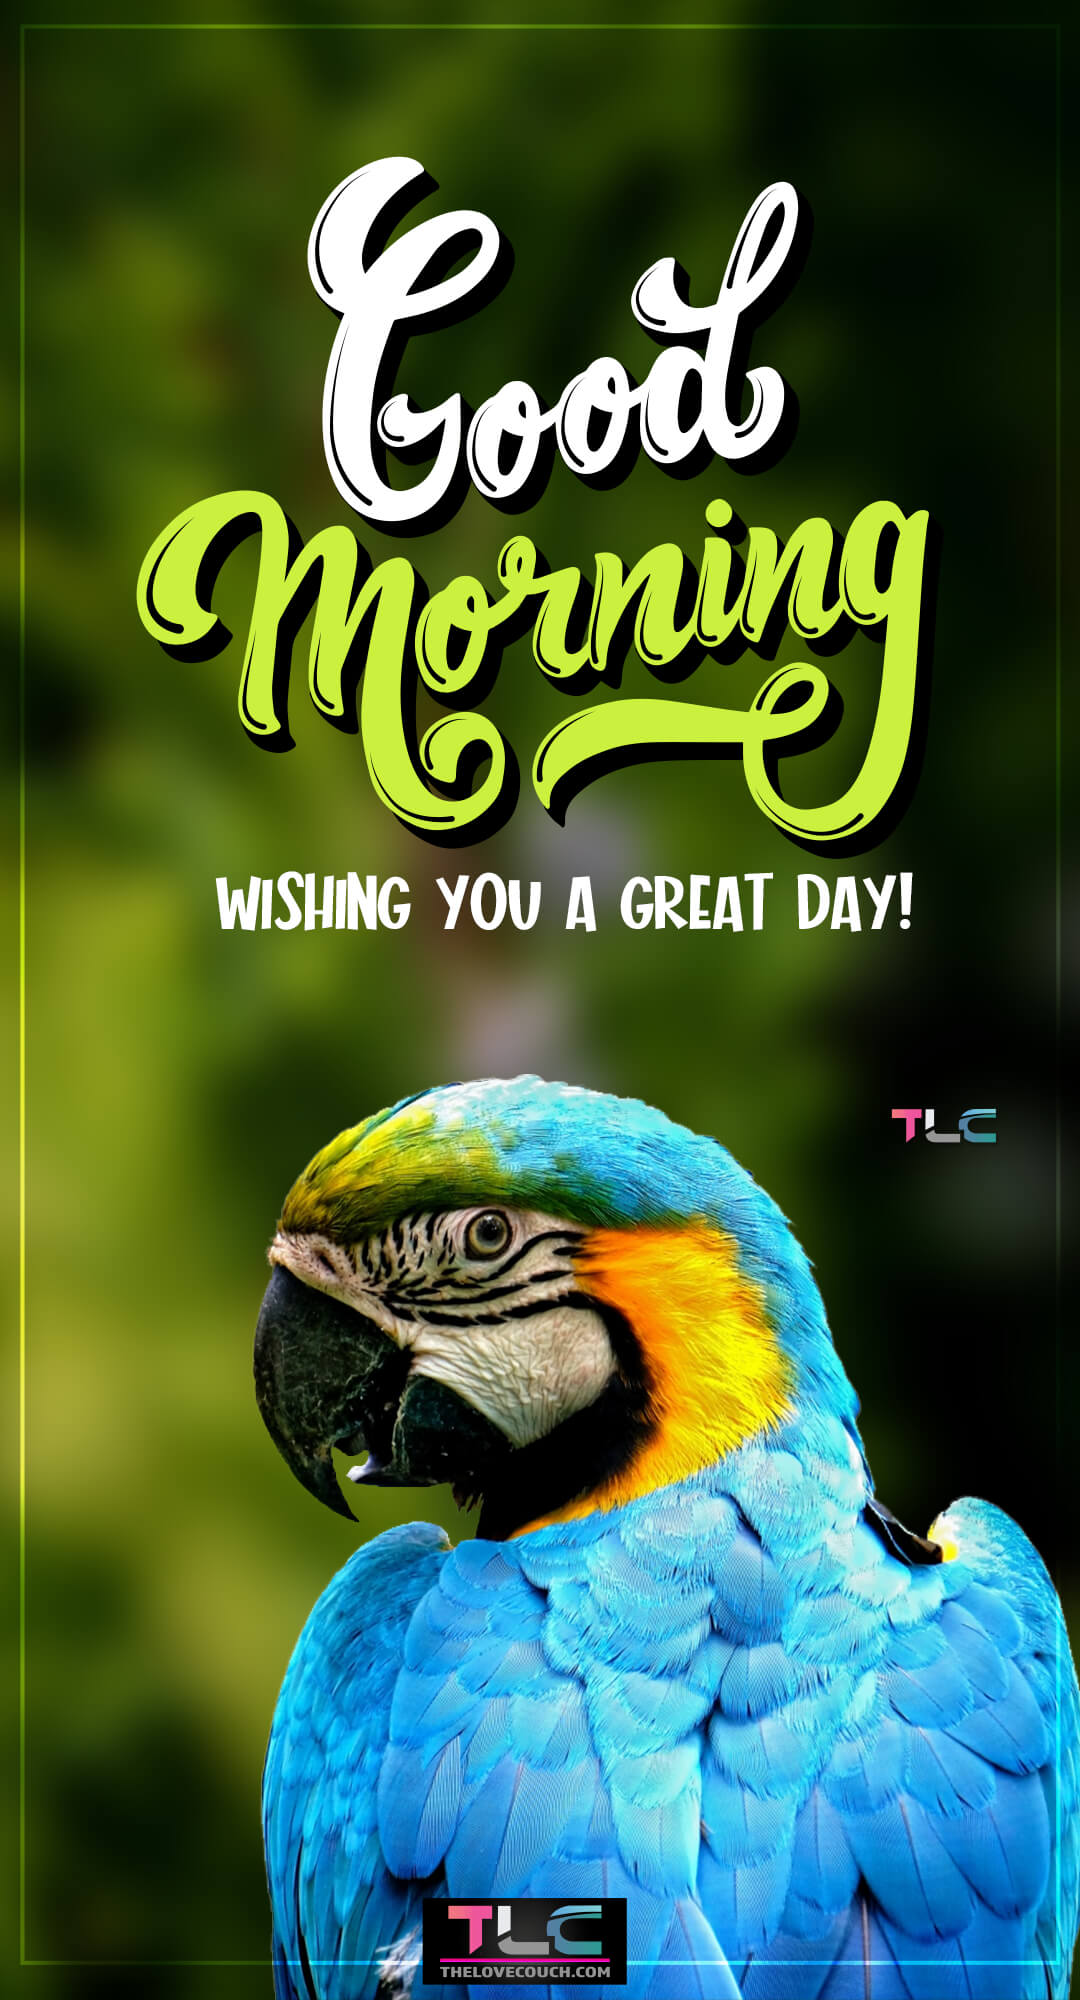 Good Morning Pictures - Lovely parrot on green background - Wishing you a great day